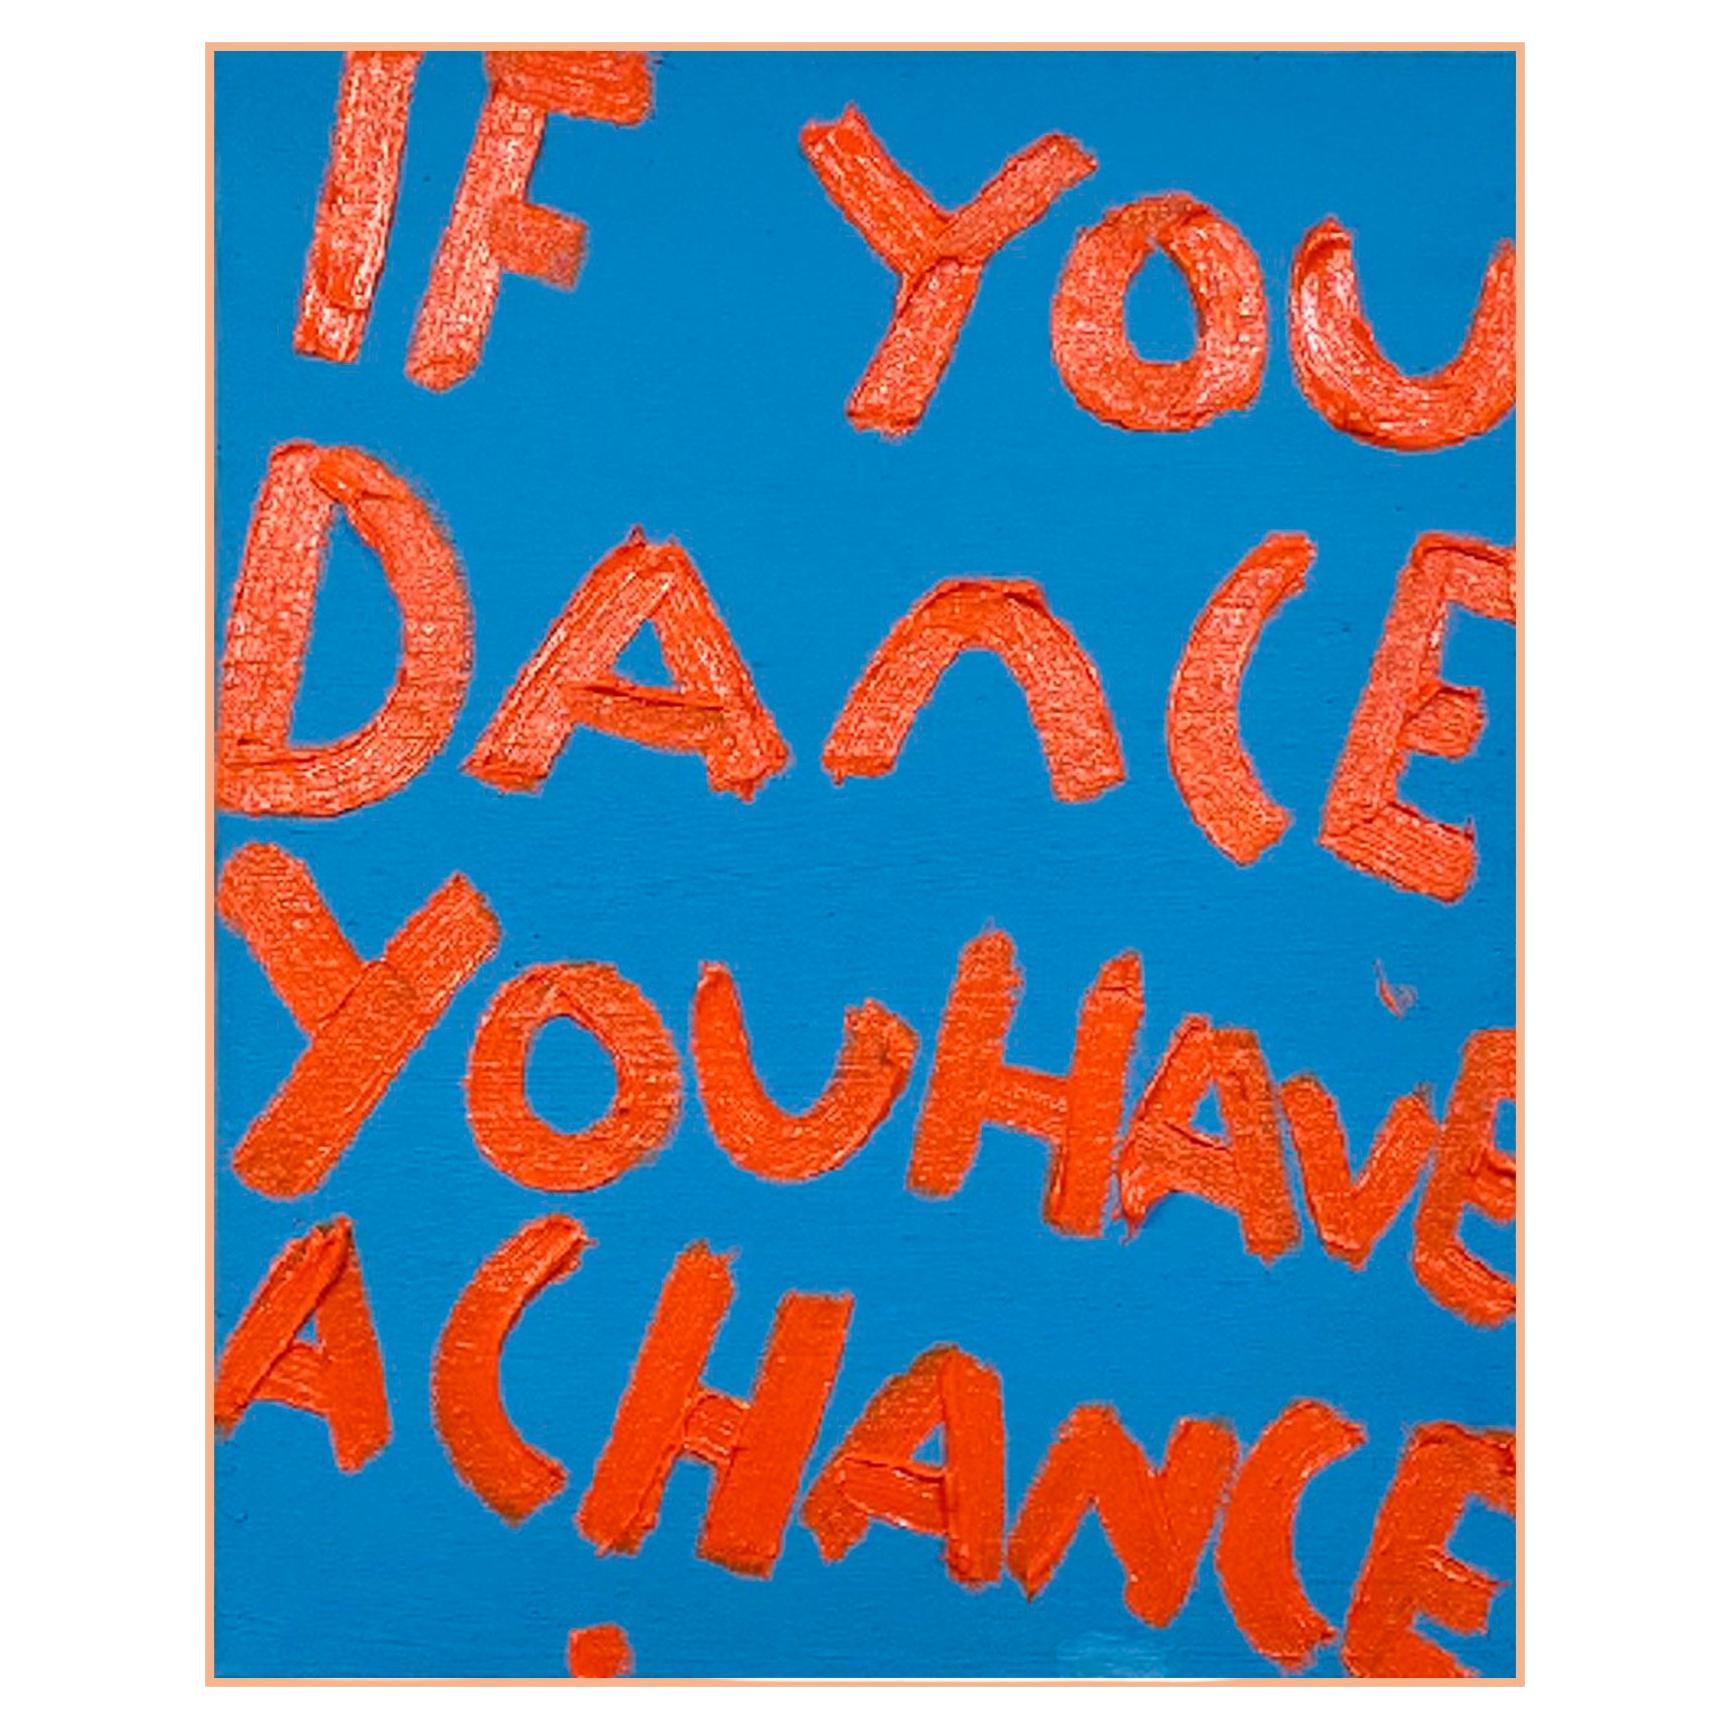 Chance and Dance, 2022, Eric Stefanski. Oil and Acrylic On Canvas